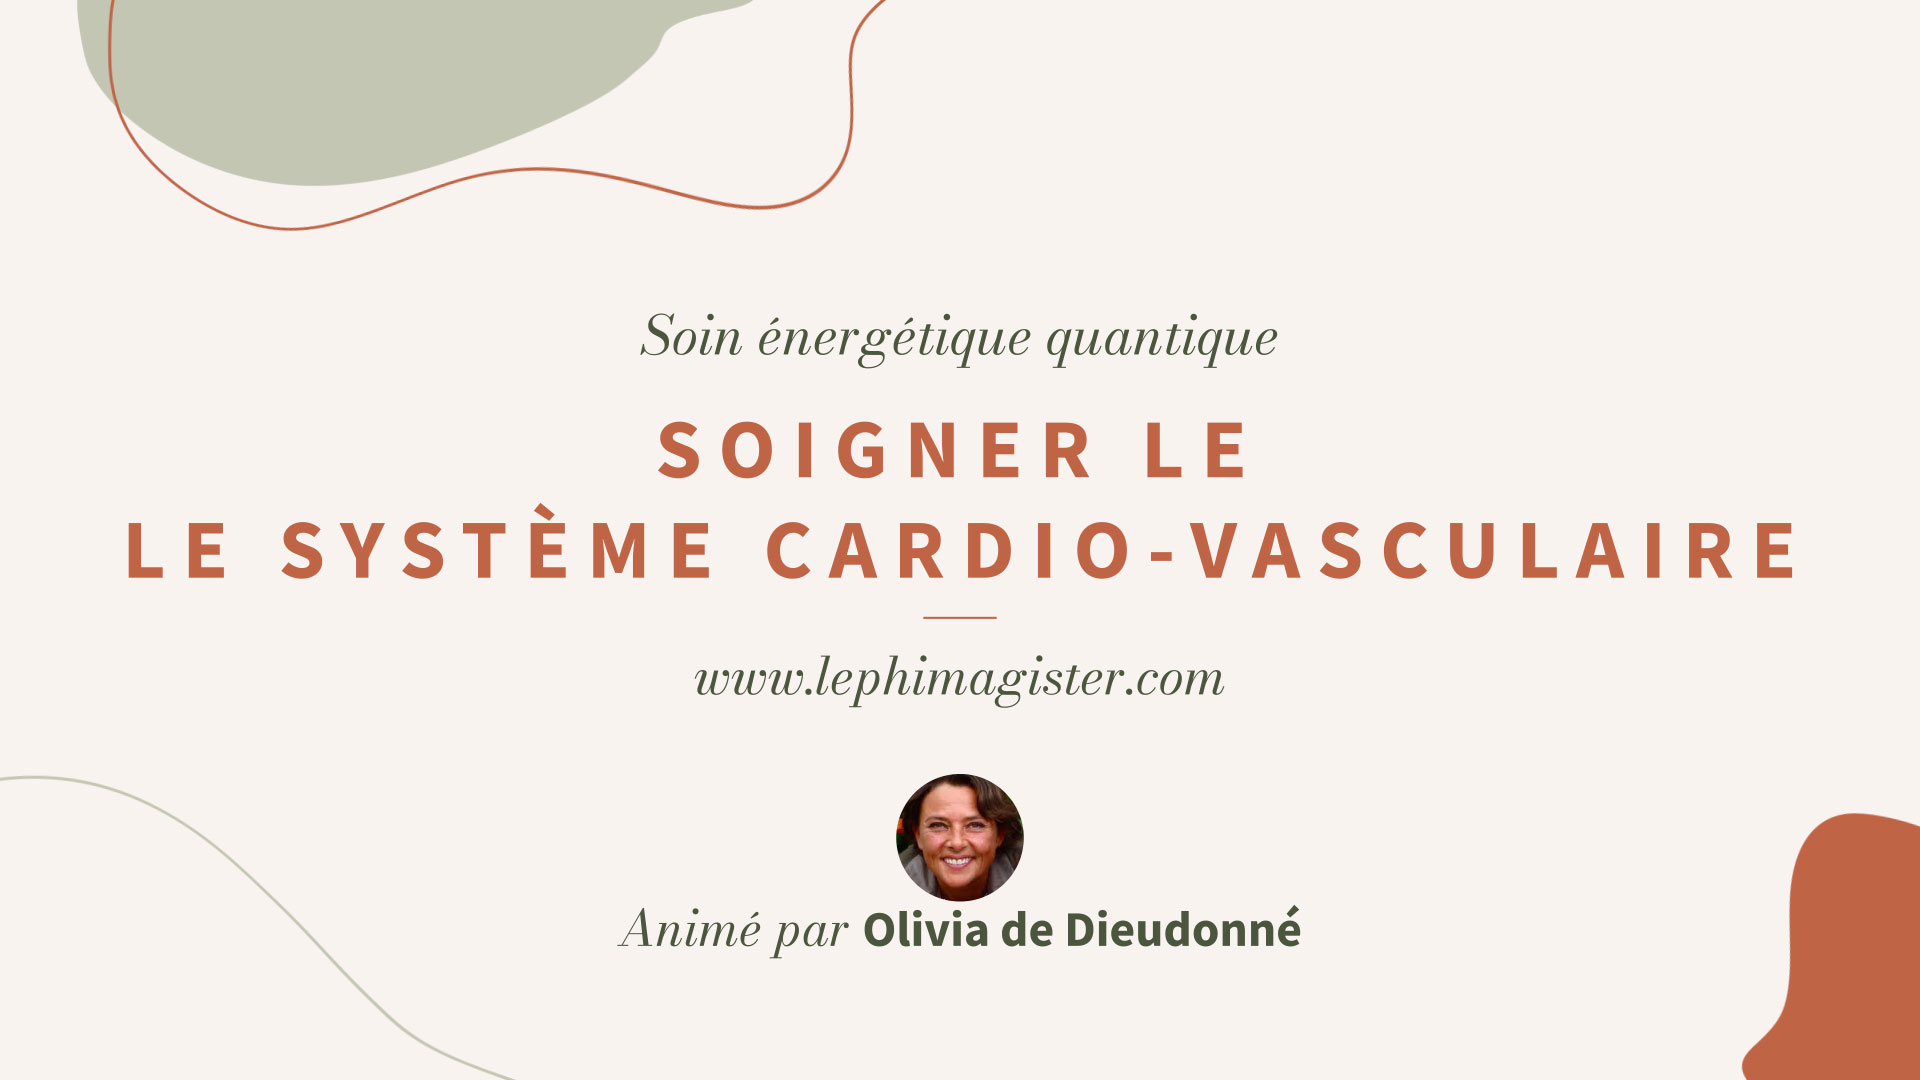 Soigner le systeme cardio-vasculaire